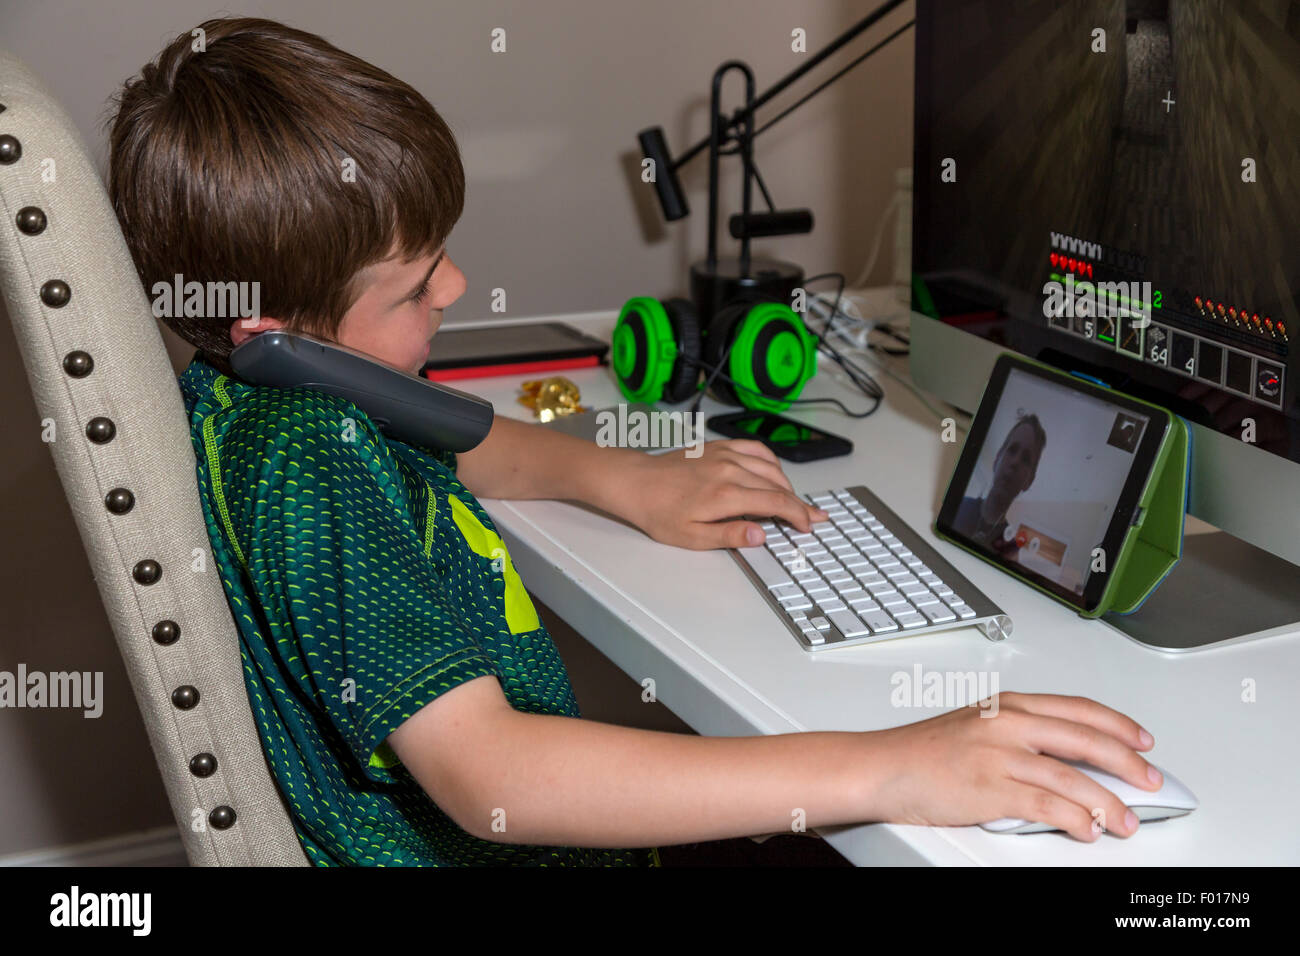 Multitasking Starts Early.  Young Boy (Nine Years Old) Talking on Phone while Playing Video Game with another Boy via Facetime, Stock Photo